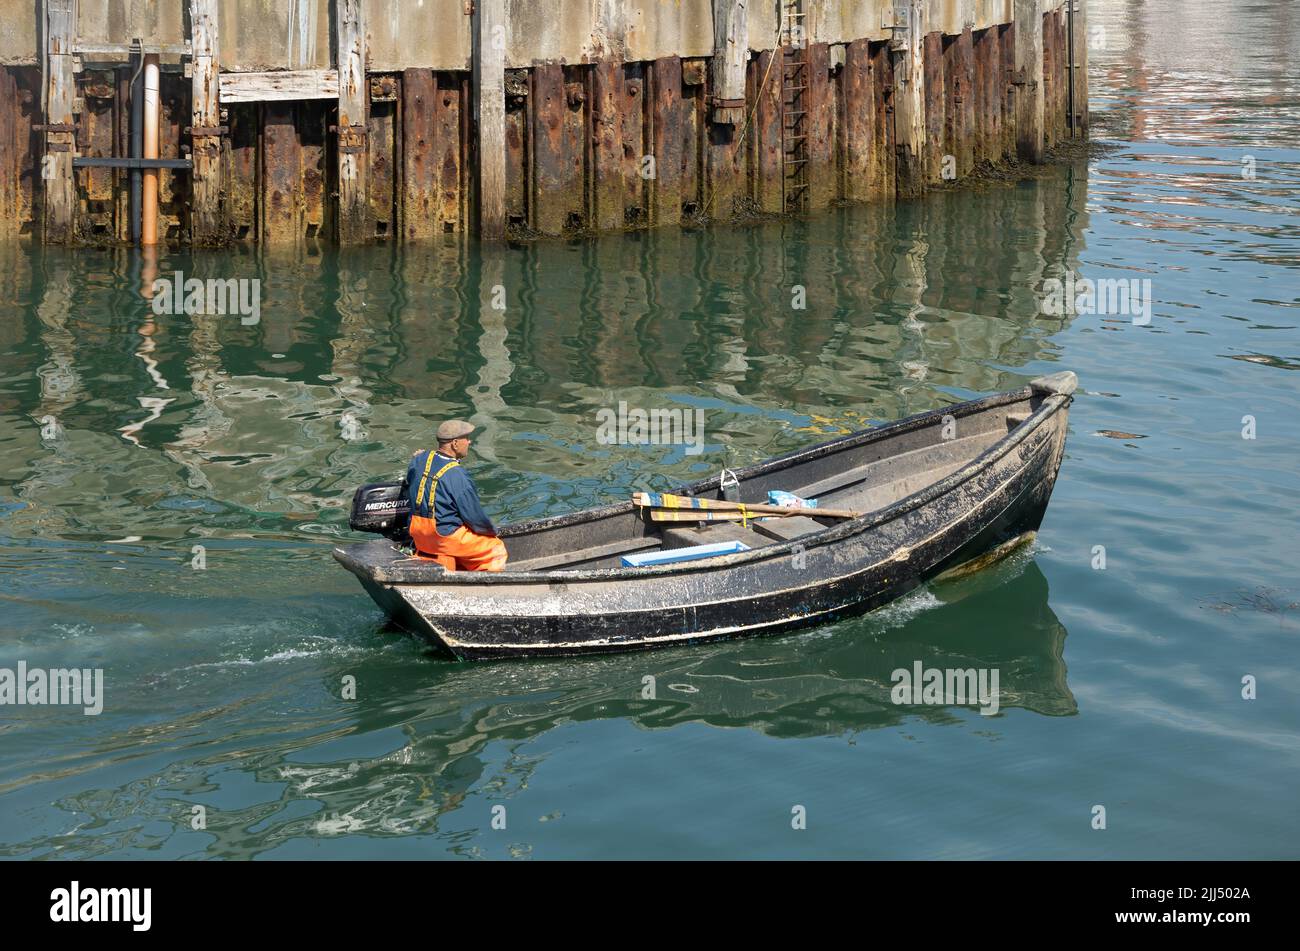 SCARBOROUGH,  NORTH YORKSHIRE, UK - JULY 18: Man in small fishing boat in Scarborough, North Yorkshire on July 18, 2022. Unidentified man Stock Photo